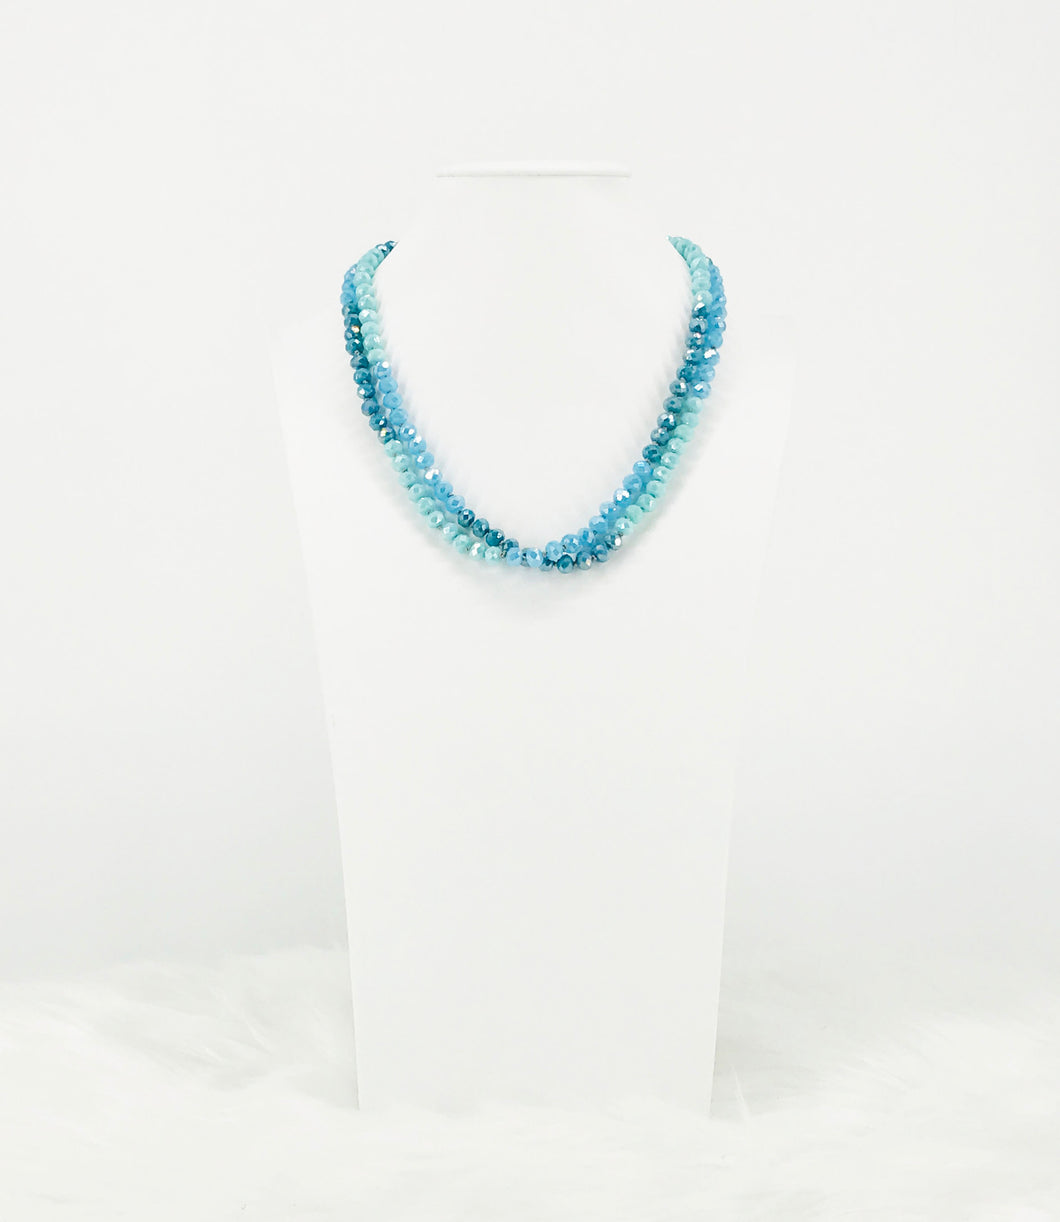 Turquoise Ombre' Knotted Glass Bead Necklace - N336